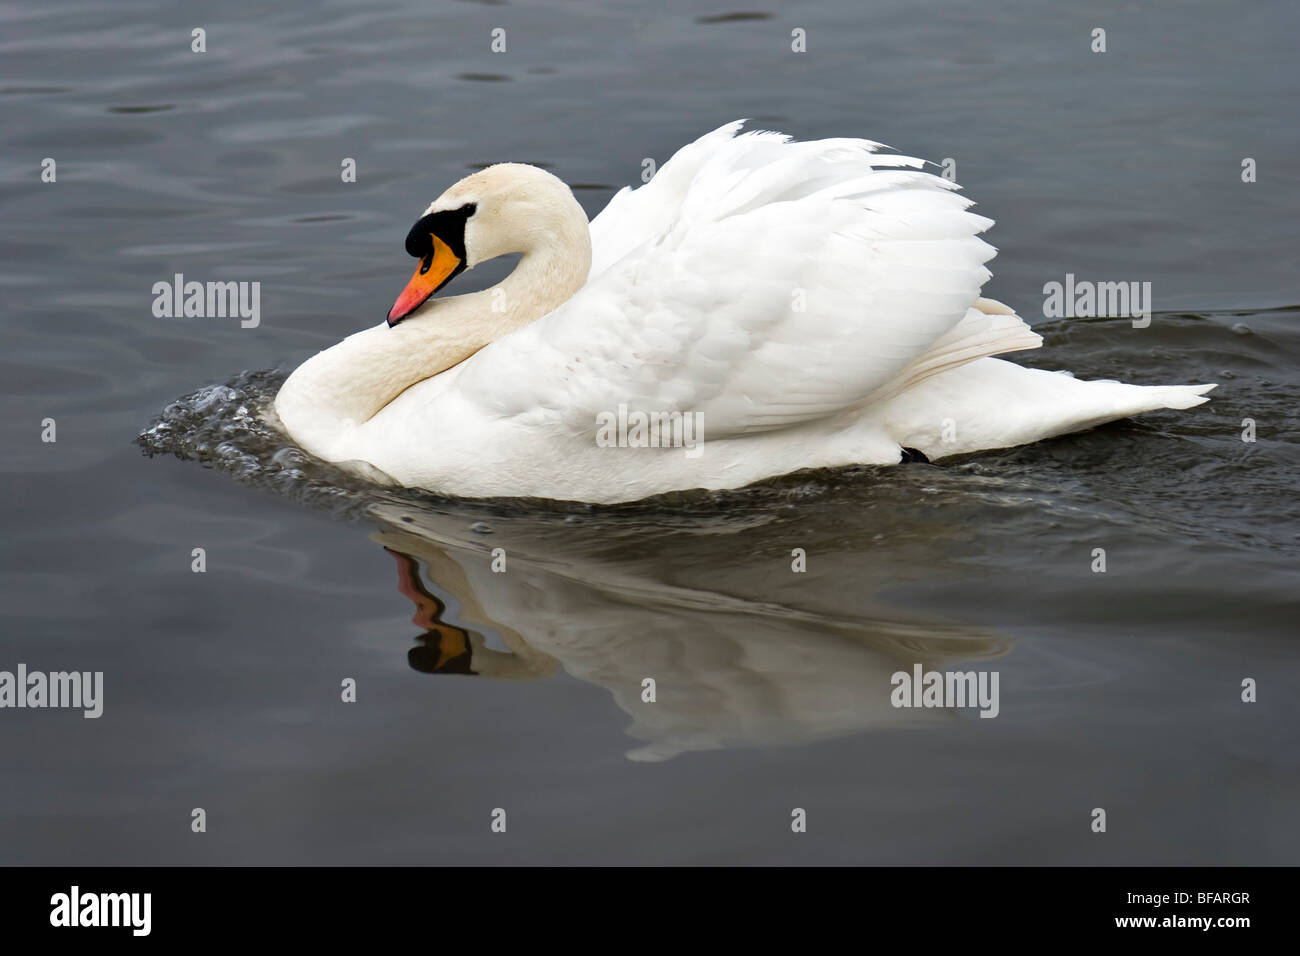 Mute swan swimming in lake with reflection Stock Photo